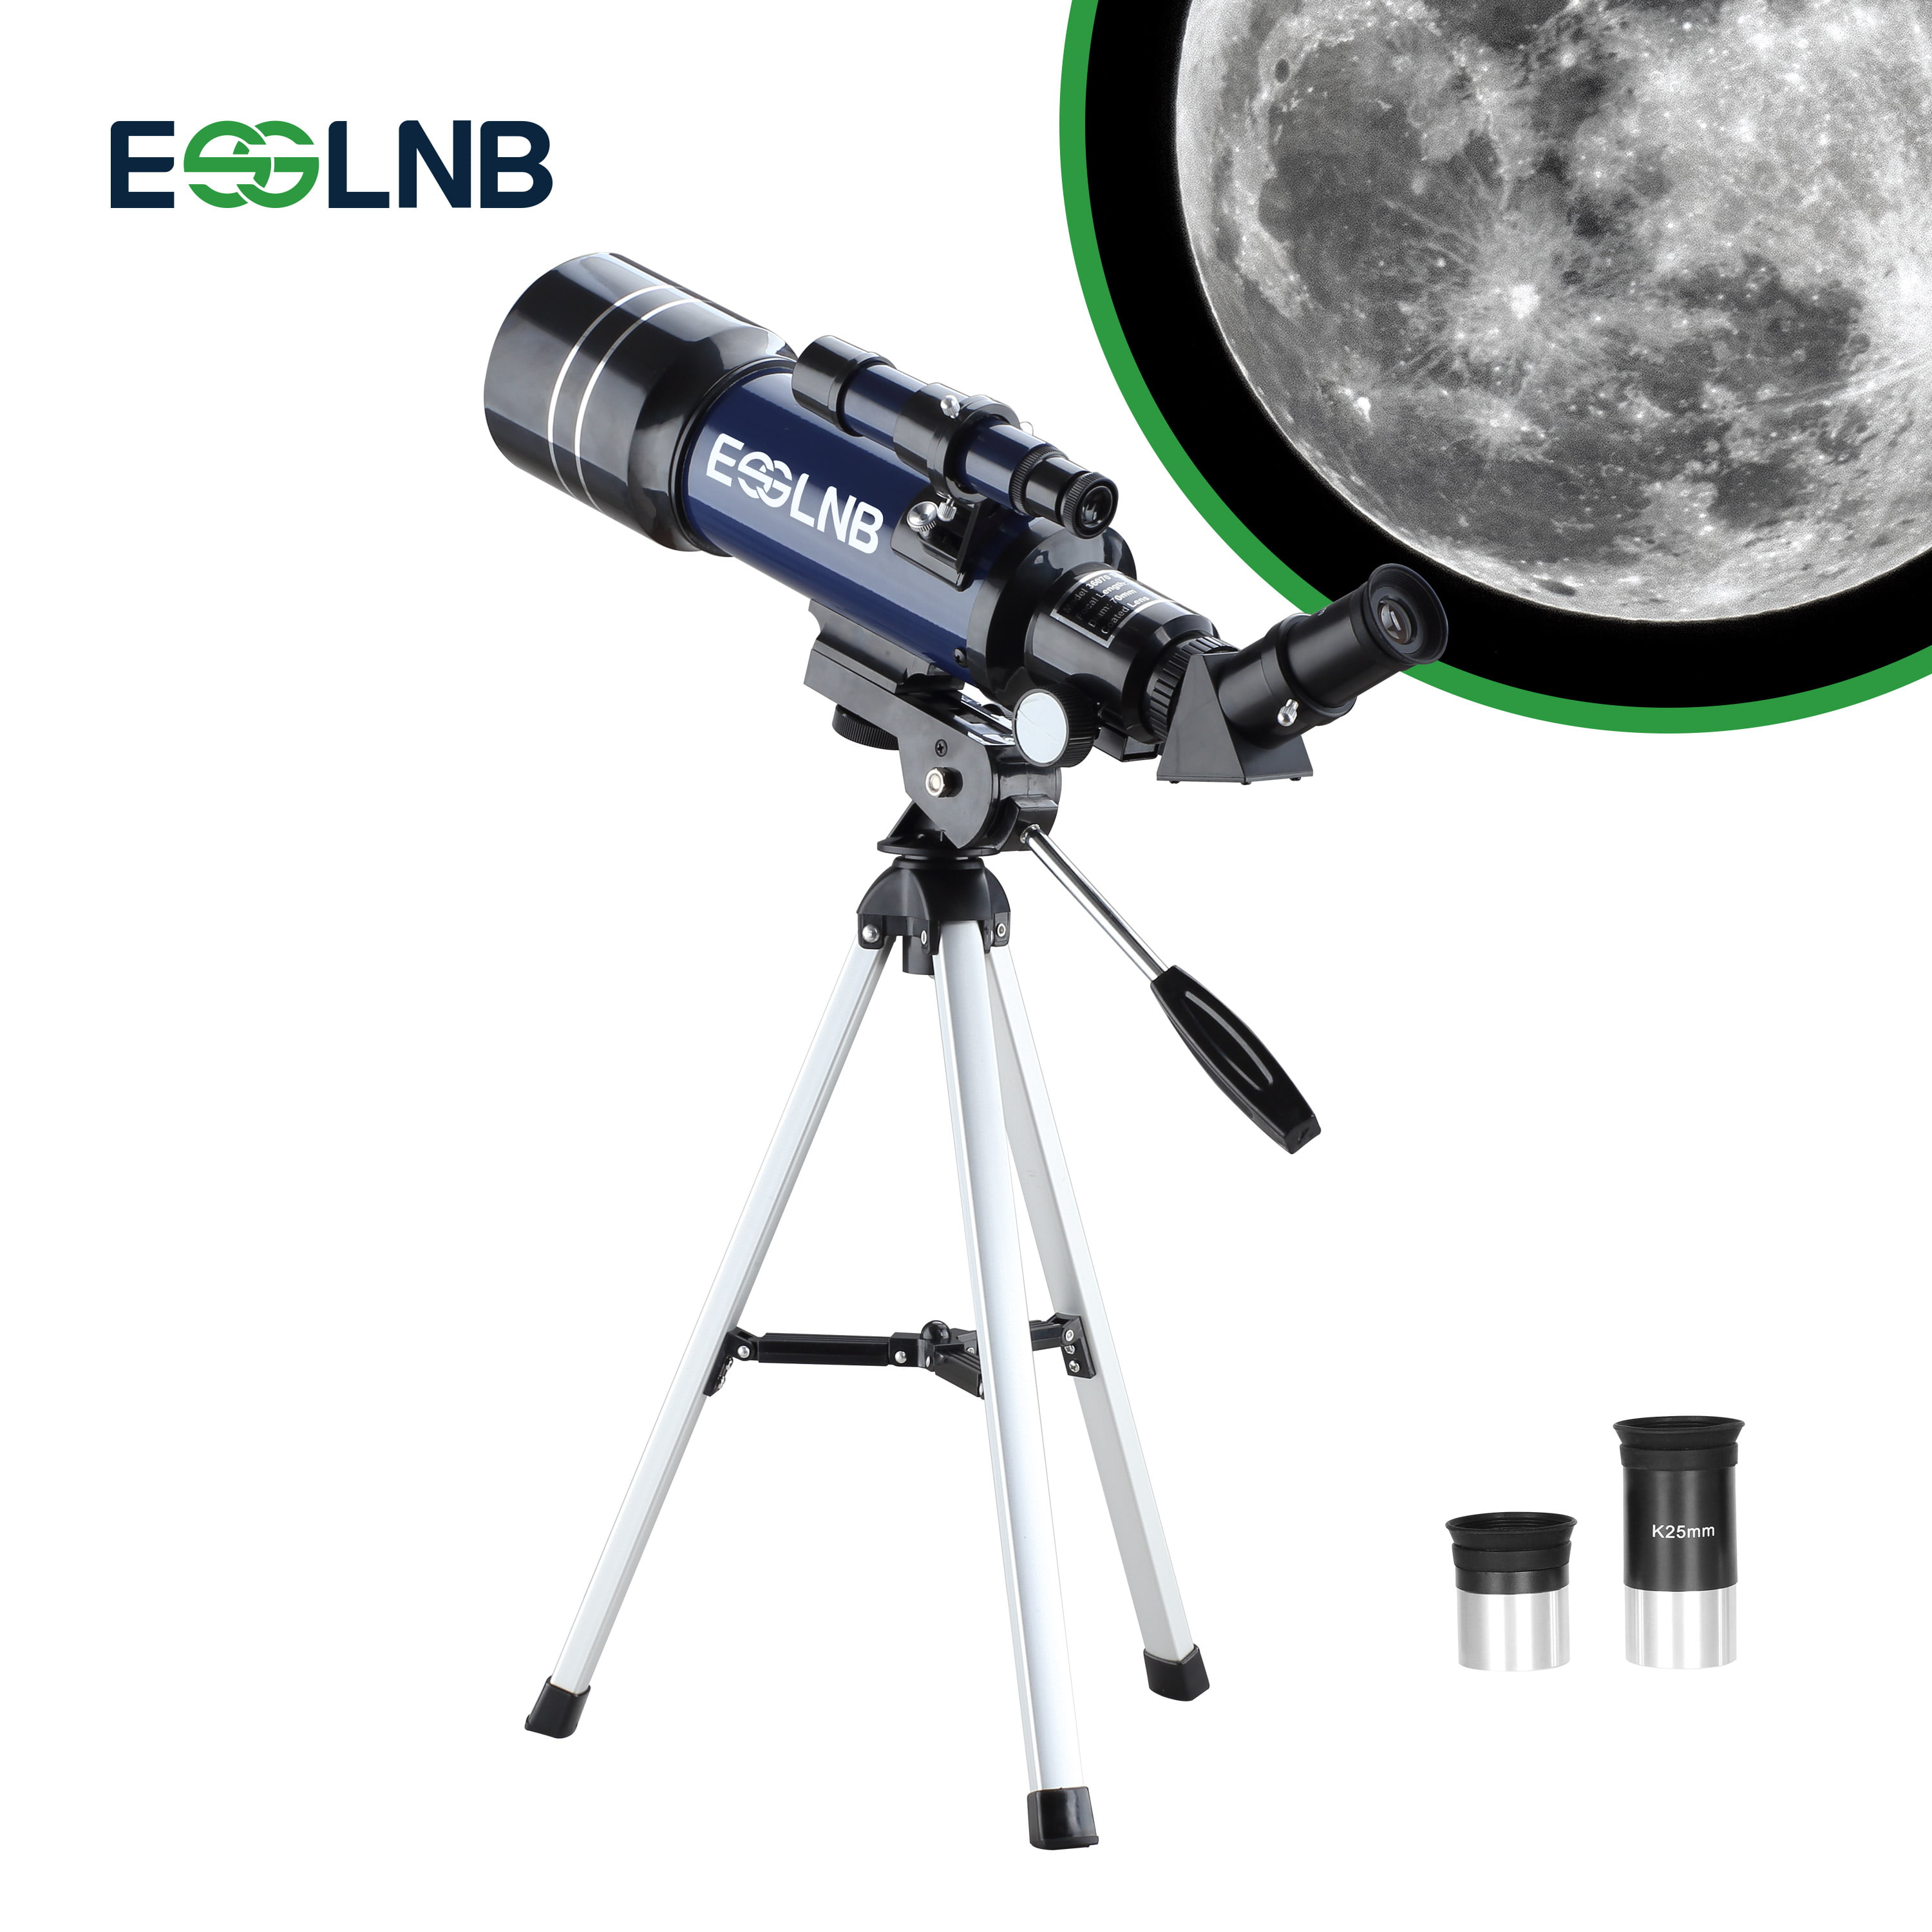 Telescope with 2 Eyepieces YXCKG Refracting Telescope Aluminum Tripod Portable Travel Telescope Telescopes for Astronomy Beginners Size : Package 3 See Scenery and Night Sky 